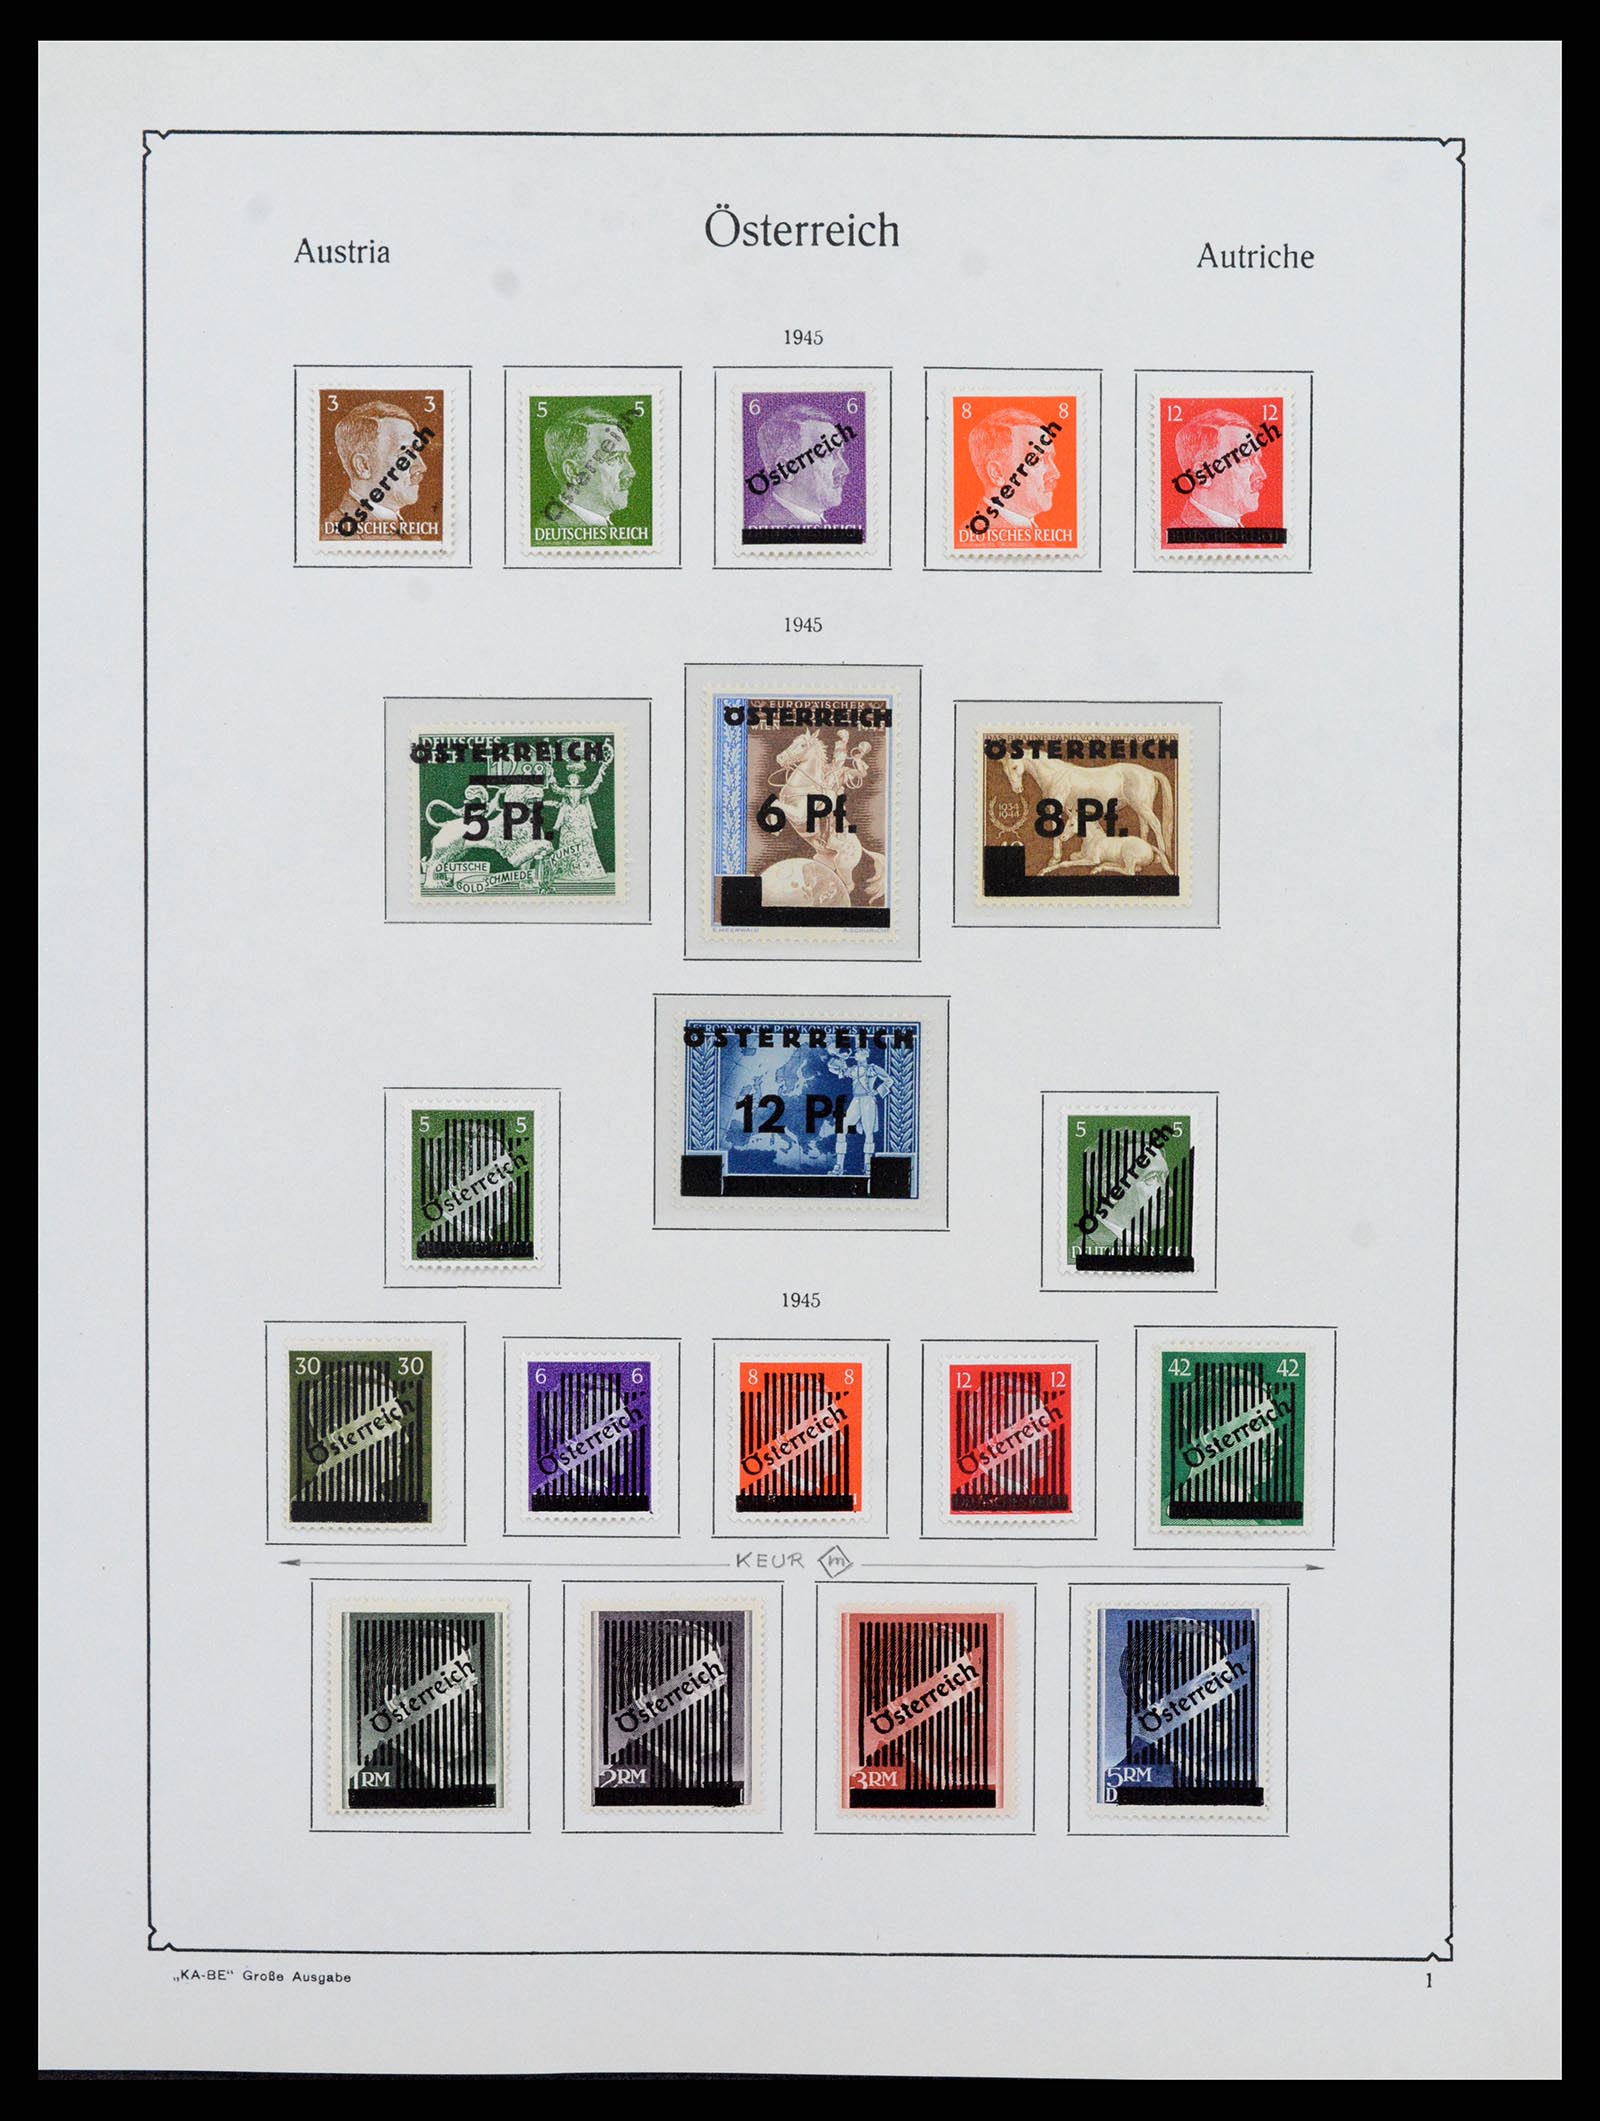 37960 098 - Stamp collection 37960 Austria and territories 1850-1984.